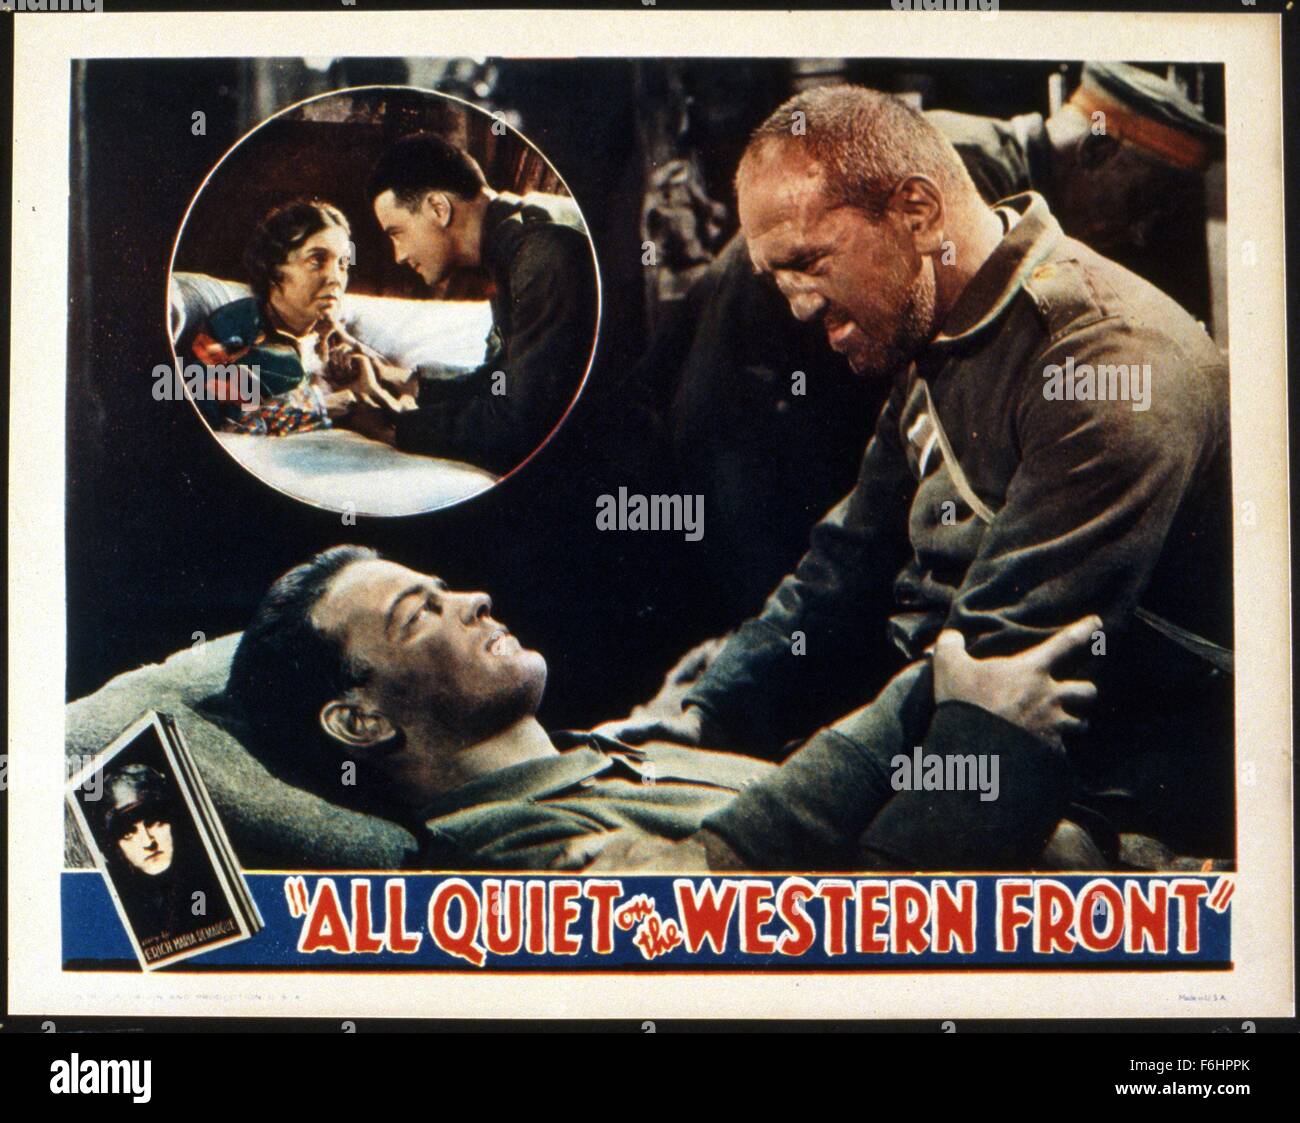 1930, Film Title: ALL QUIET ON THE WESTERN FRONT, Director: LEWIS MILESTONE, Pictured: LEW AYRES, LOUIS WOLHEIM, SOLDIERS, WAR, WW1, GERMAN, GERMANY, DYING, DEATH, DEATH BED, HERO, ARMY, UNIFORM, INJURED, GRASP. (Credit Image: SNAP) Stock Photo